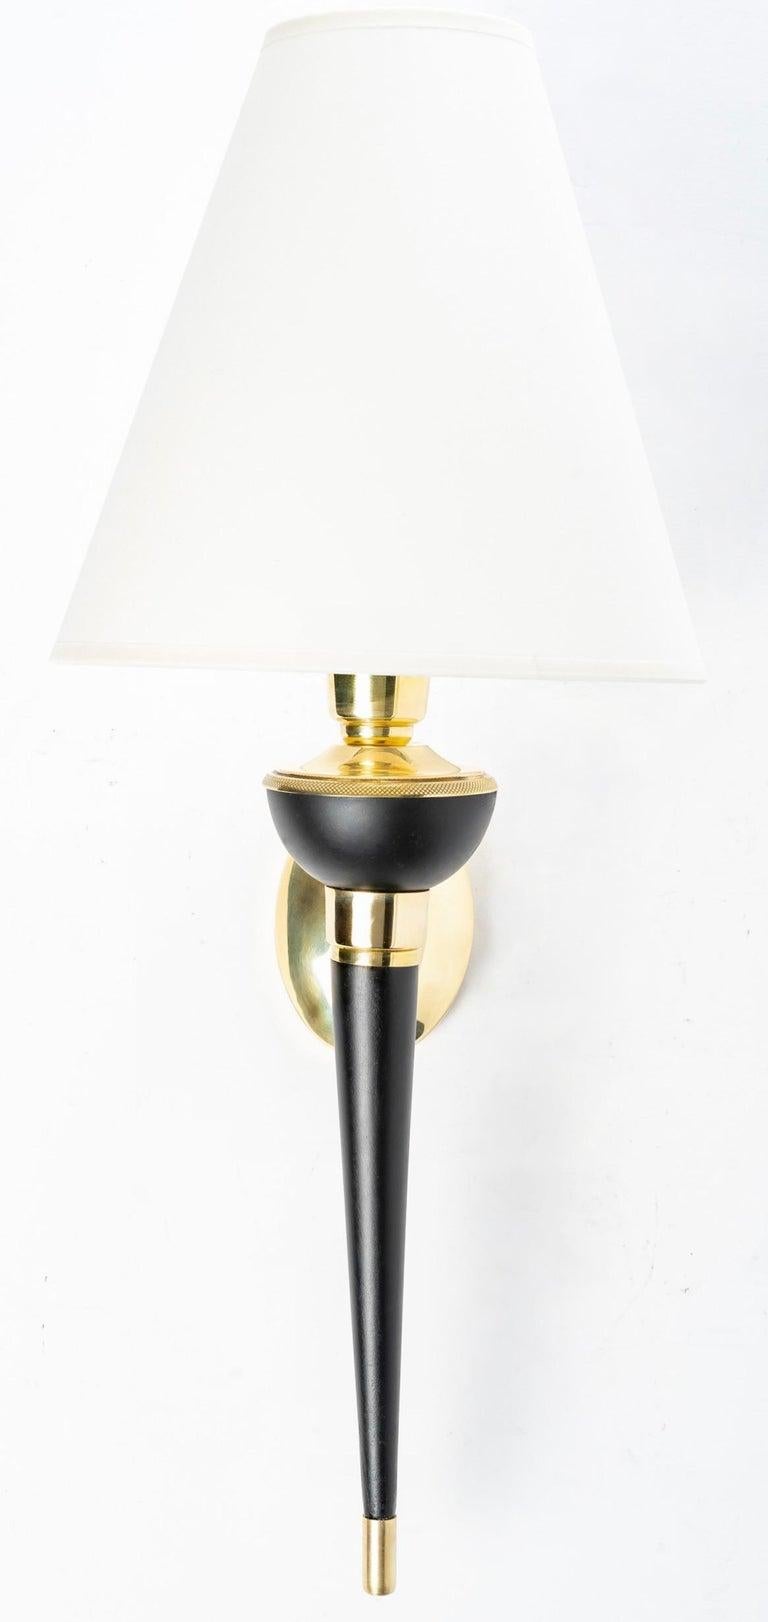 Composed of a wall support of oval shape in gilded brass on which is posed an arm of light in the shape of point in blackened wood heightened on the low part of gilded brass and on the high part retained with the wall support by a ring in gilded